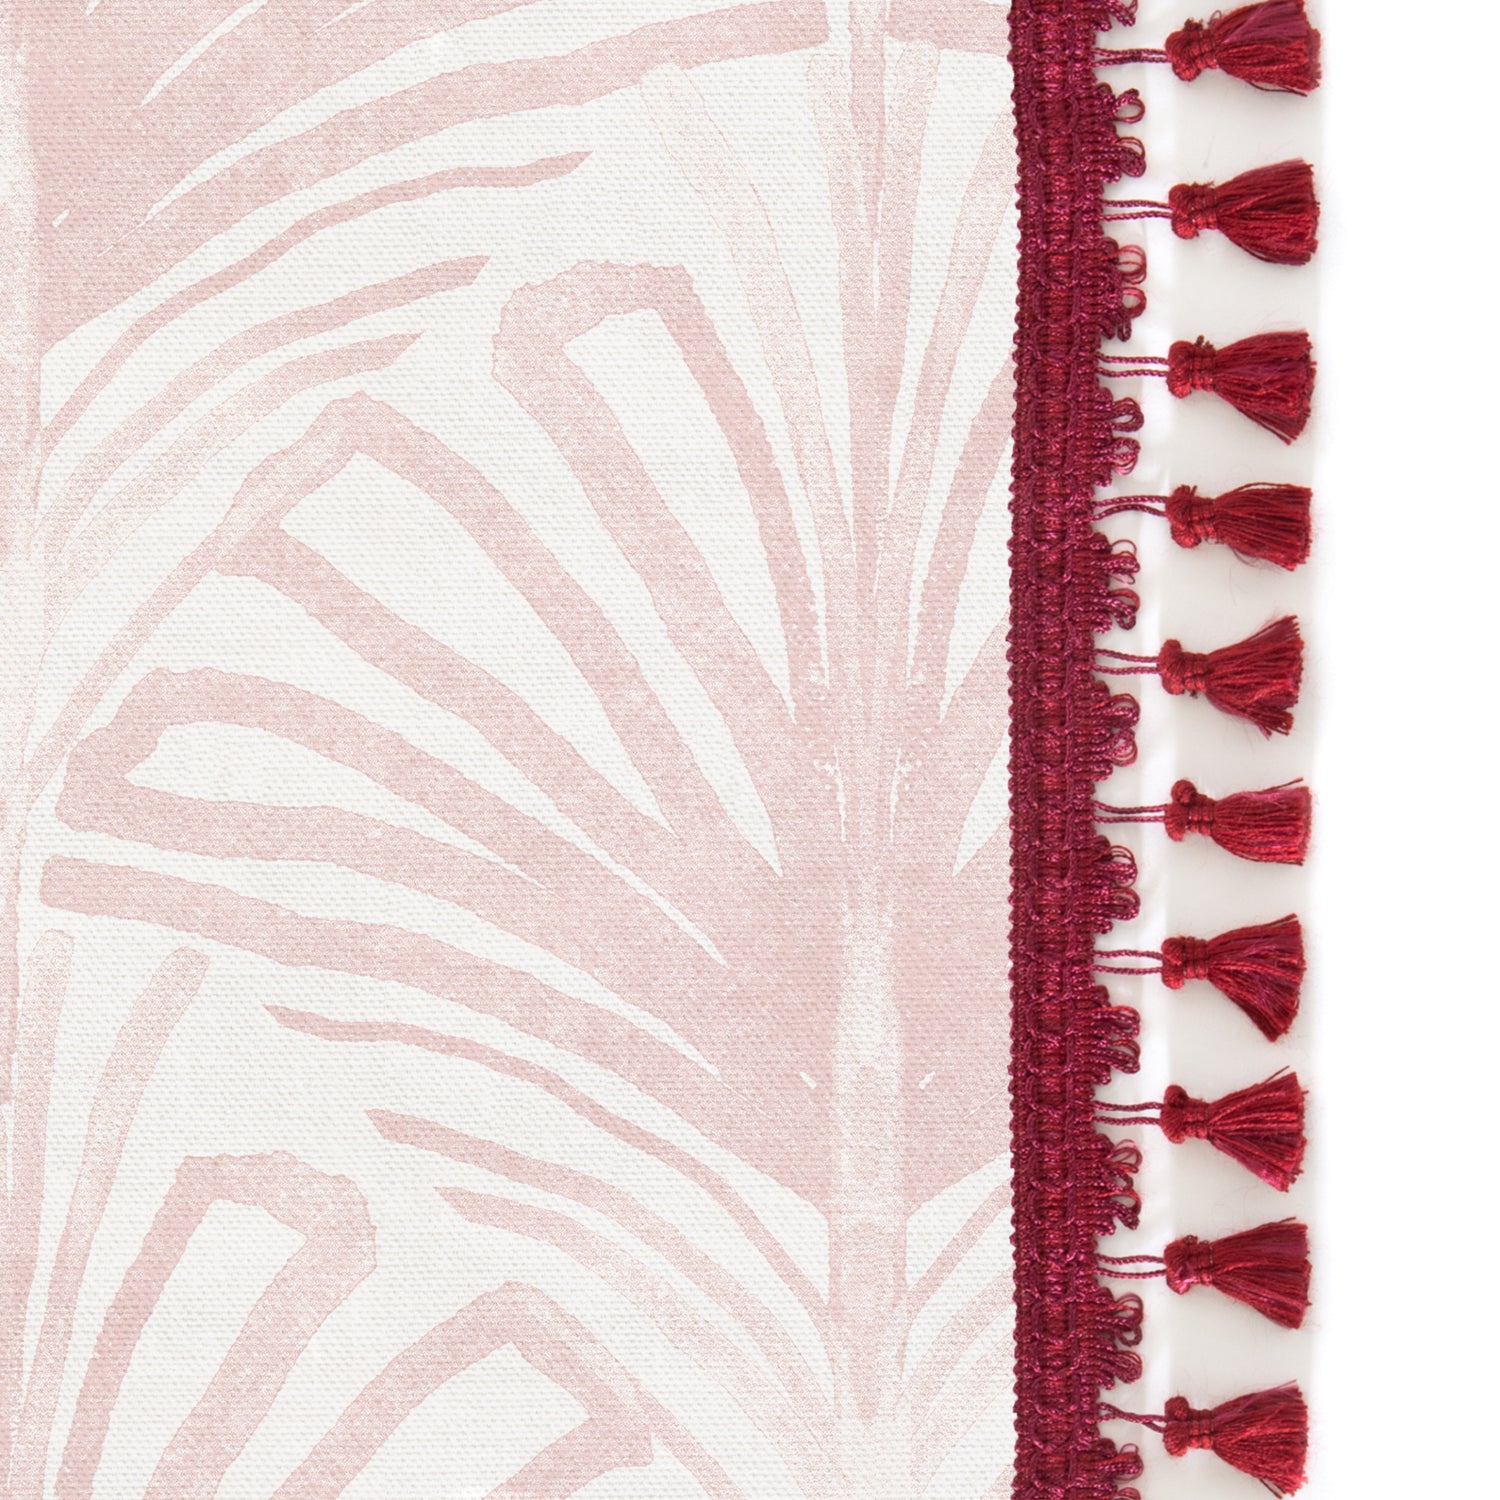 Upclose picture of Suzy Rose custom shower curtain with rose raspberry tassel trim